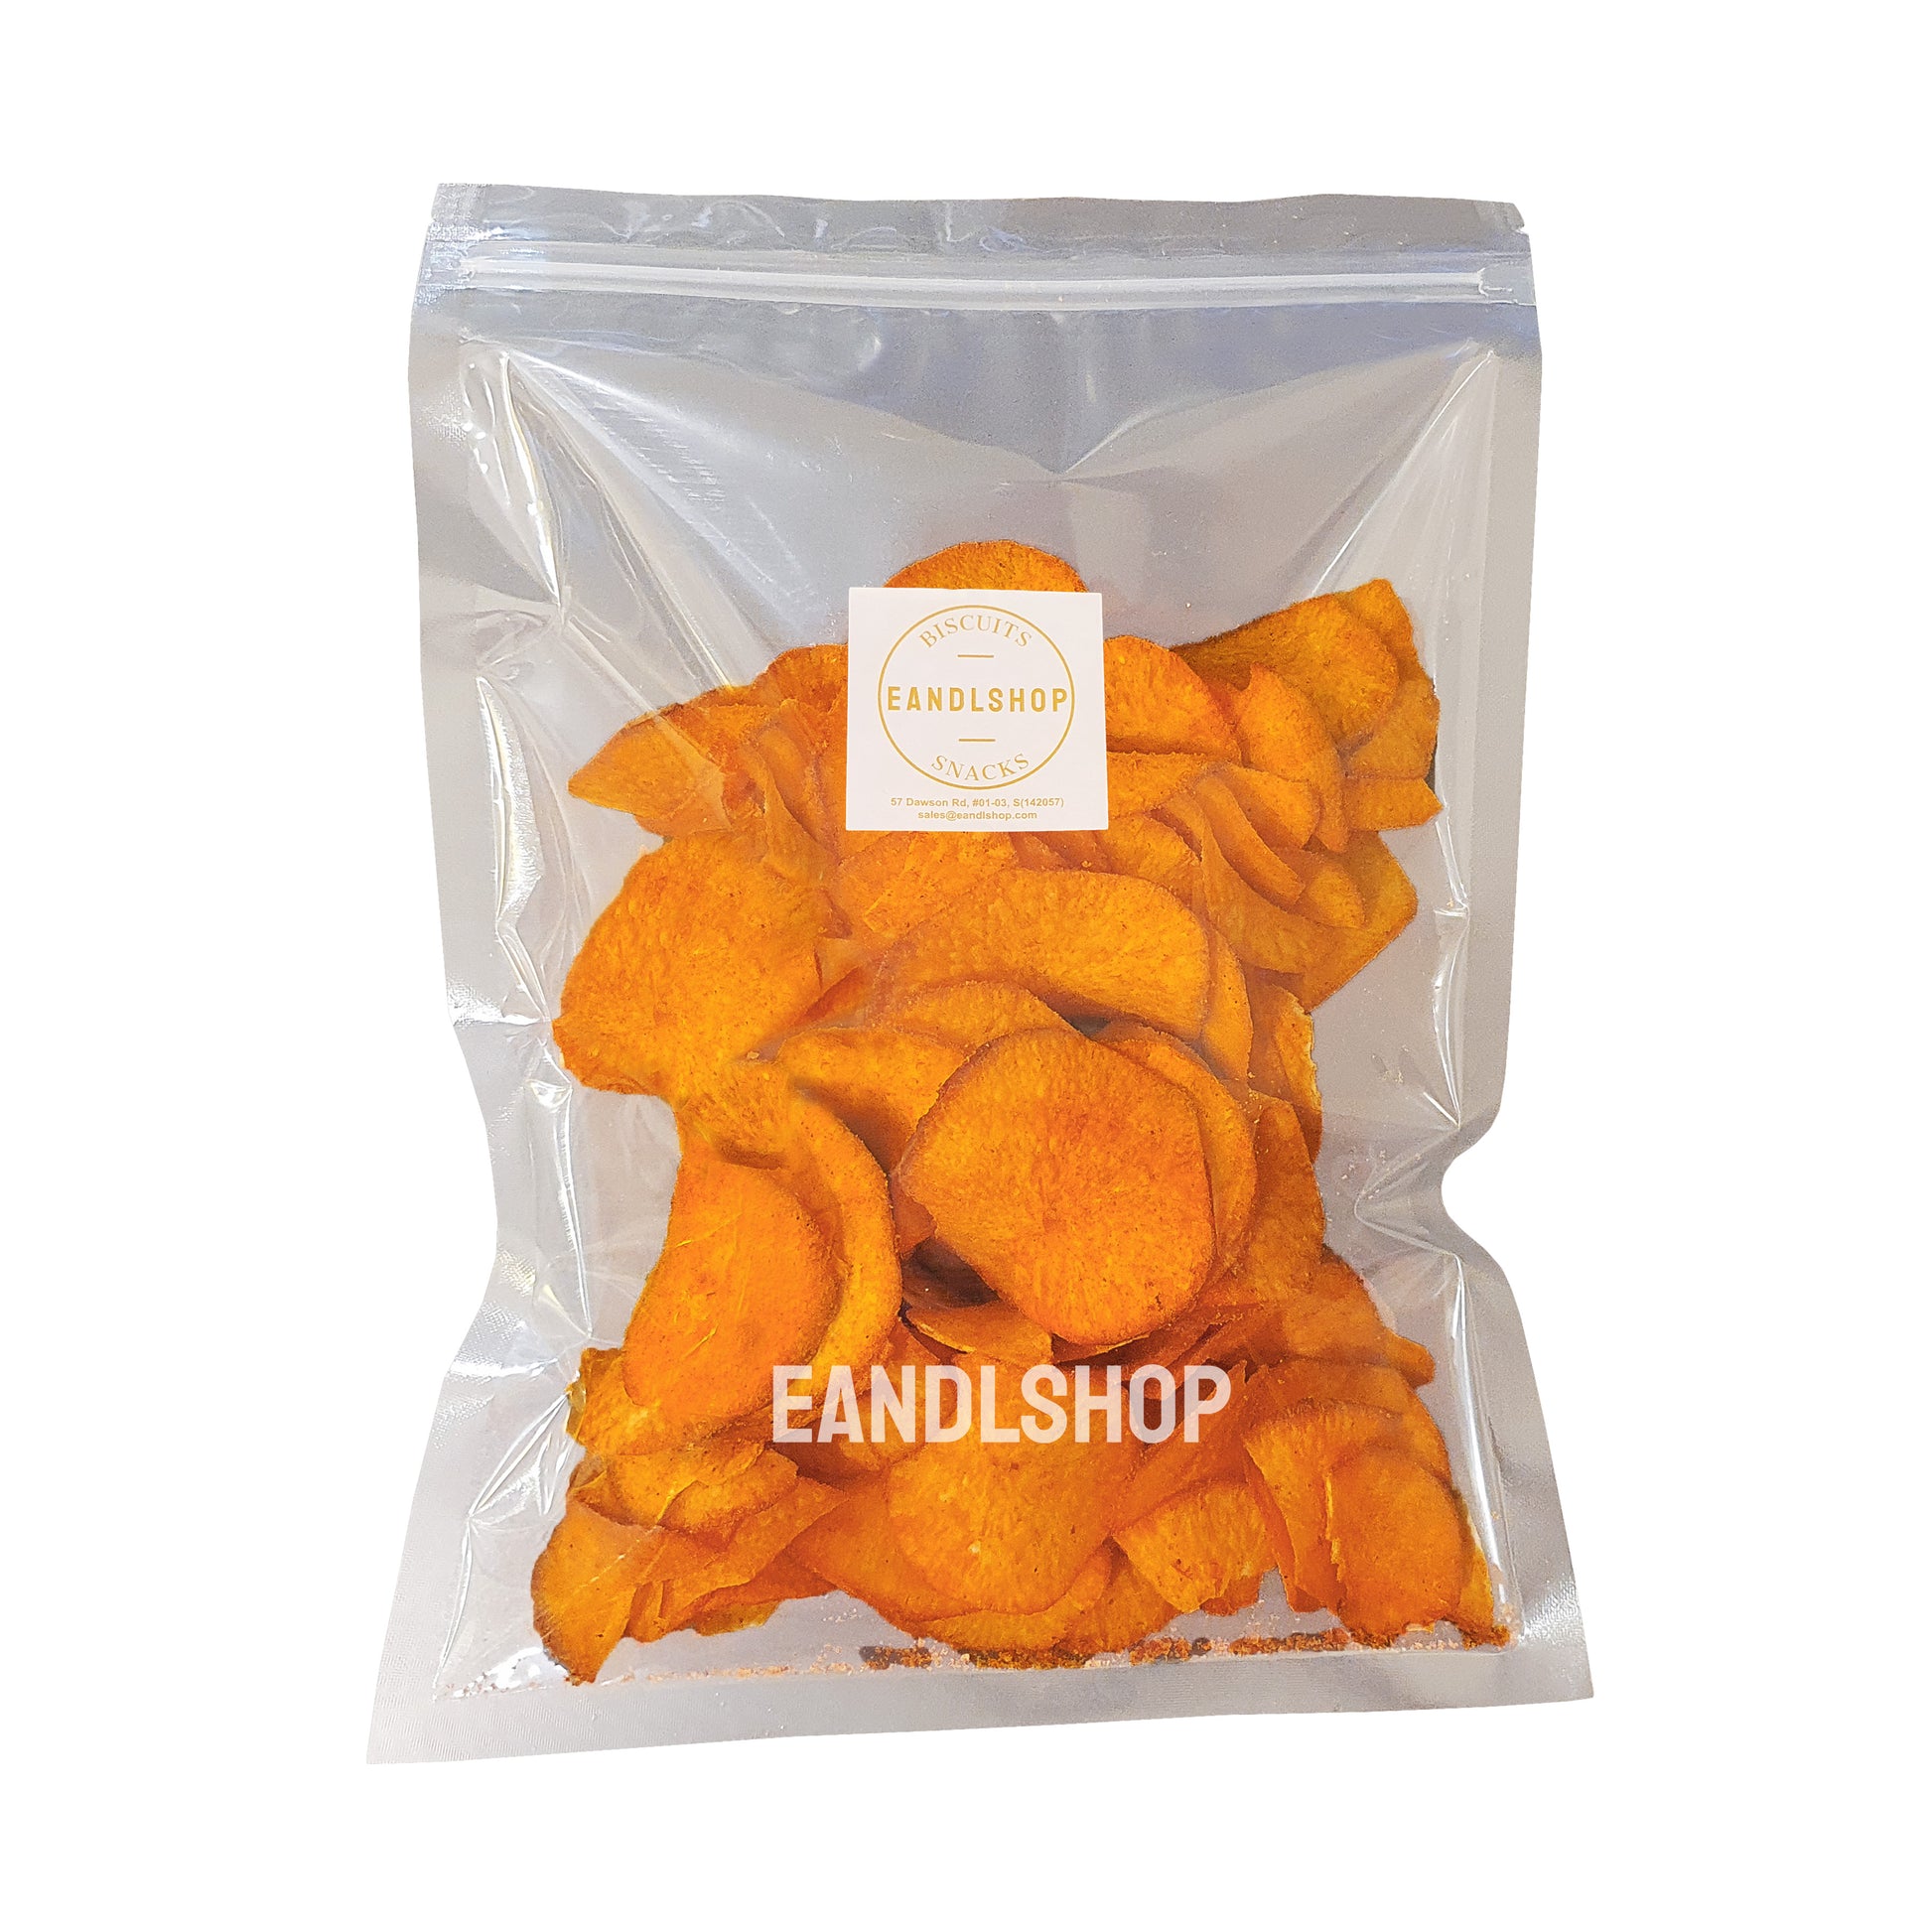 Tapioca Chips (Curry). Old-school biscuits, modern snacks (chips, crackers), cakes, gummies, plums, dried fruits, nuts, herbal tea – available at www.EANDLSHOP.com